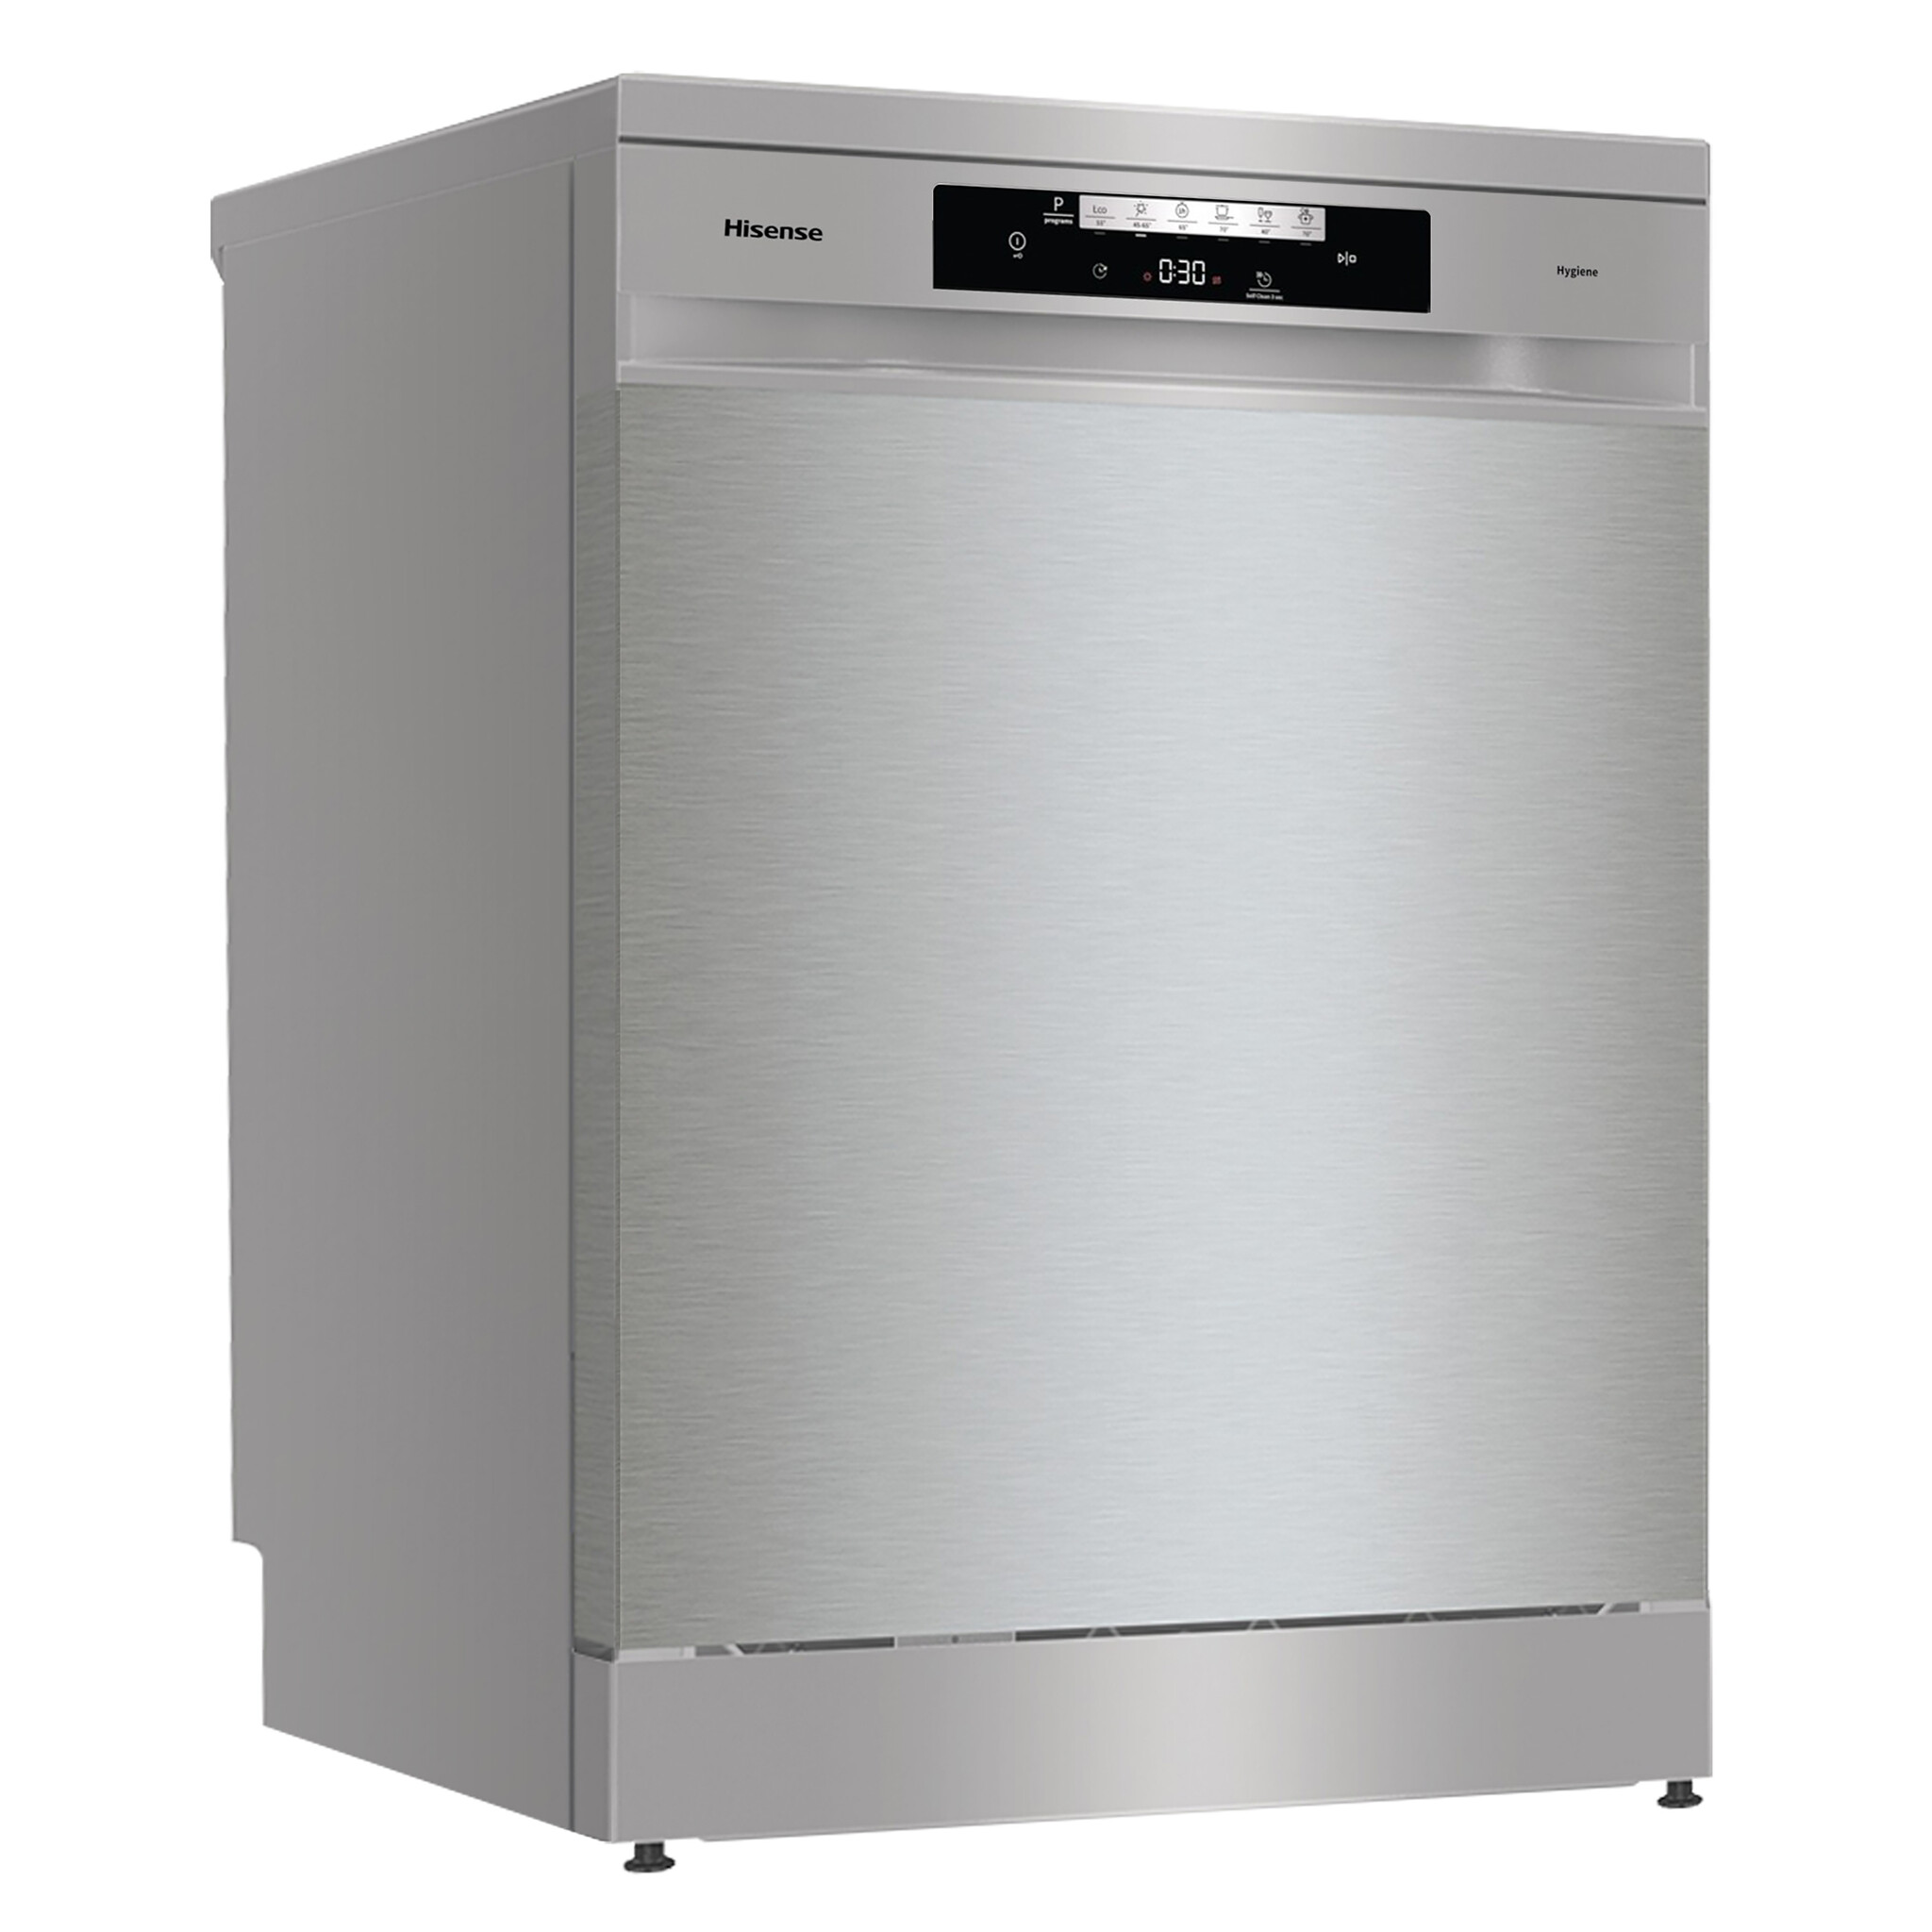 Hisense HS643D60XUK Standard Dishwasher – Stainless Steel – D Rated #366681